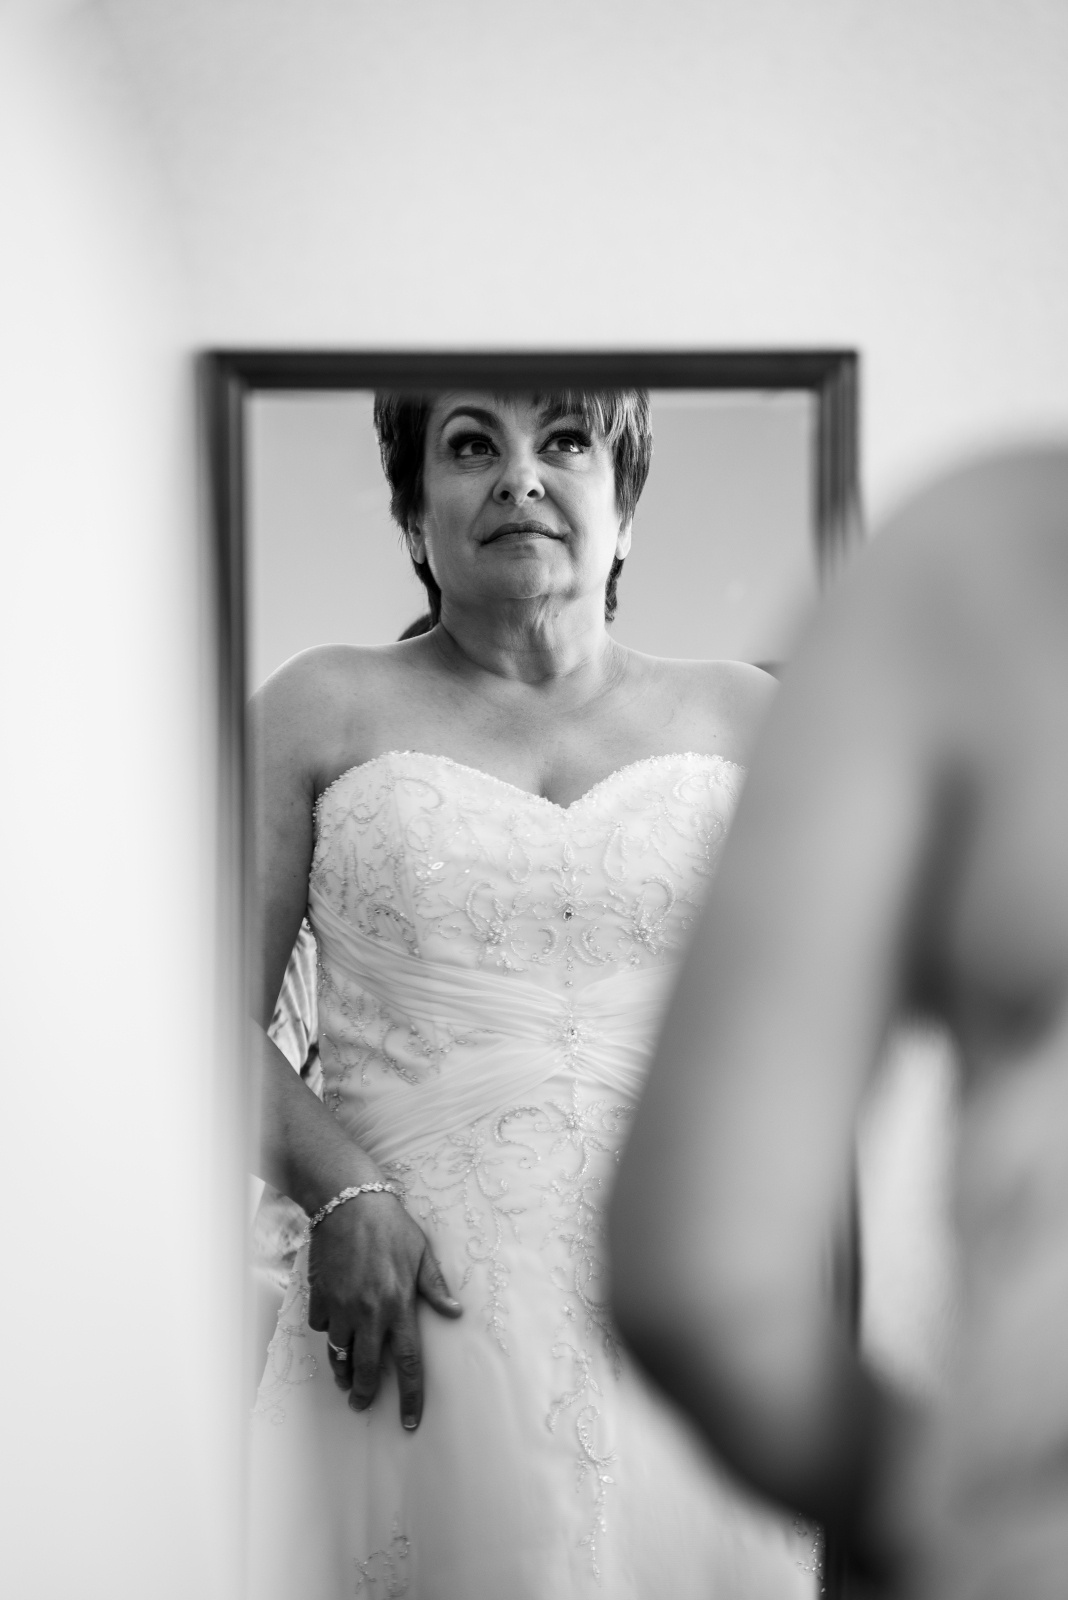 Bride looking in mirror, getting ready, wedding preparation, wedding dress, classic wedding photo, black and white, older bride, older couple, romantic outdoor urban wedding ceremony at Penthouse Events, Ohio City, Cleveland Flats